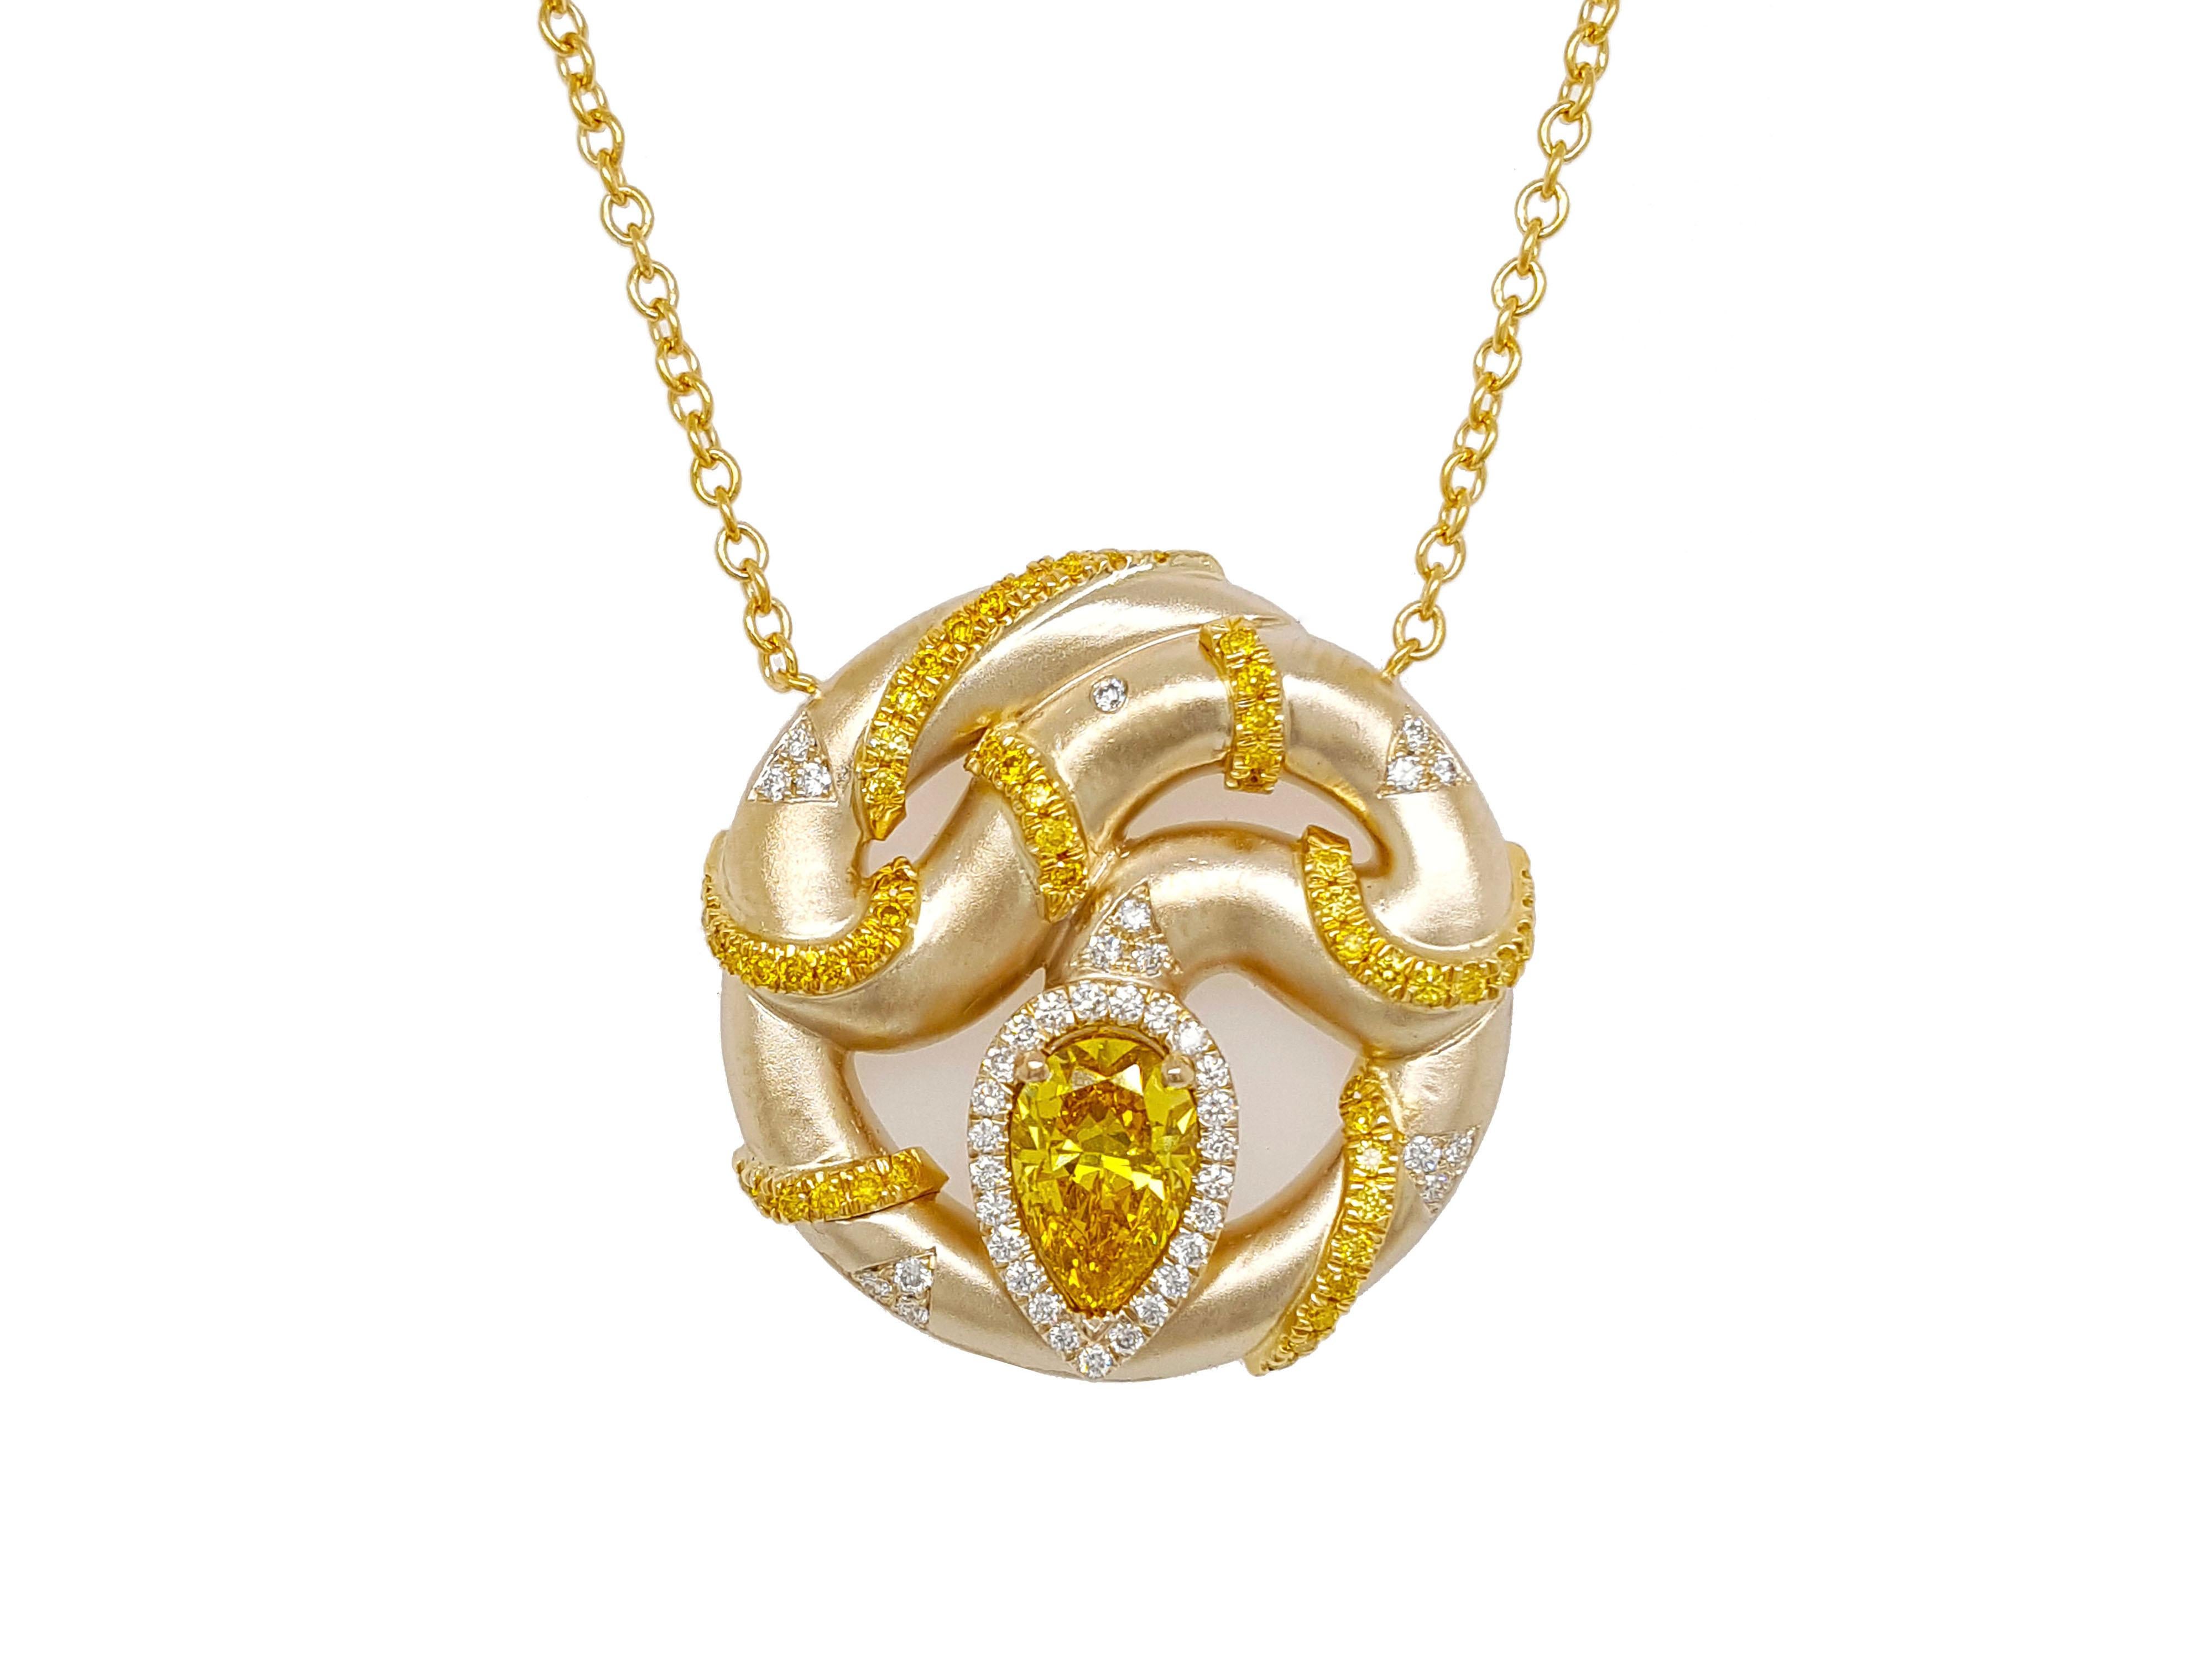 1 Carat Fancy Vivid Yellow Diamond Pendant Necklace 18K Gold GIA Certified In New Condition For Sale In New York, NY